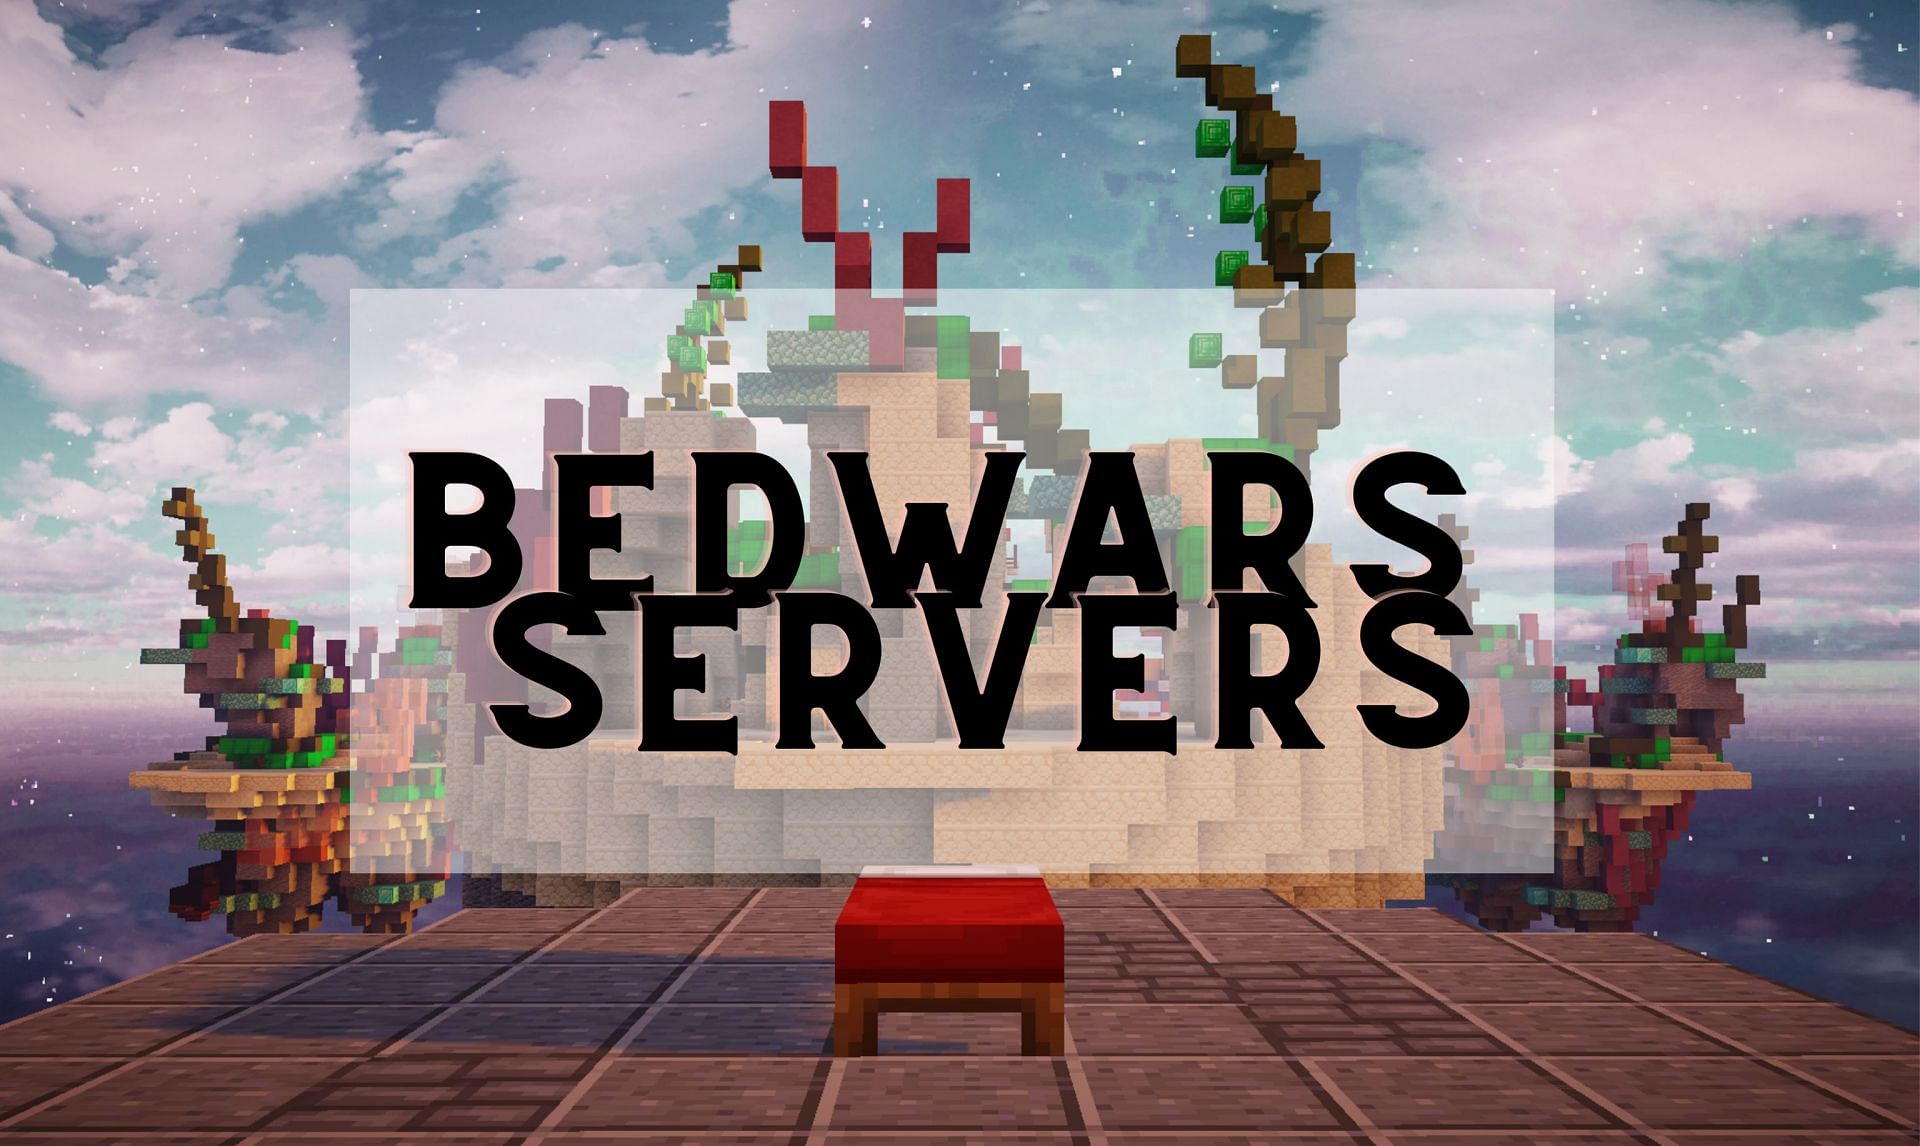 The gaming master - Much of you guys wanted me a server for bedwars so this  is it